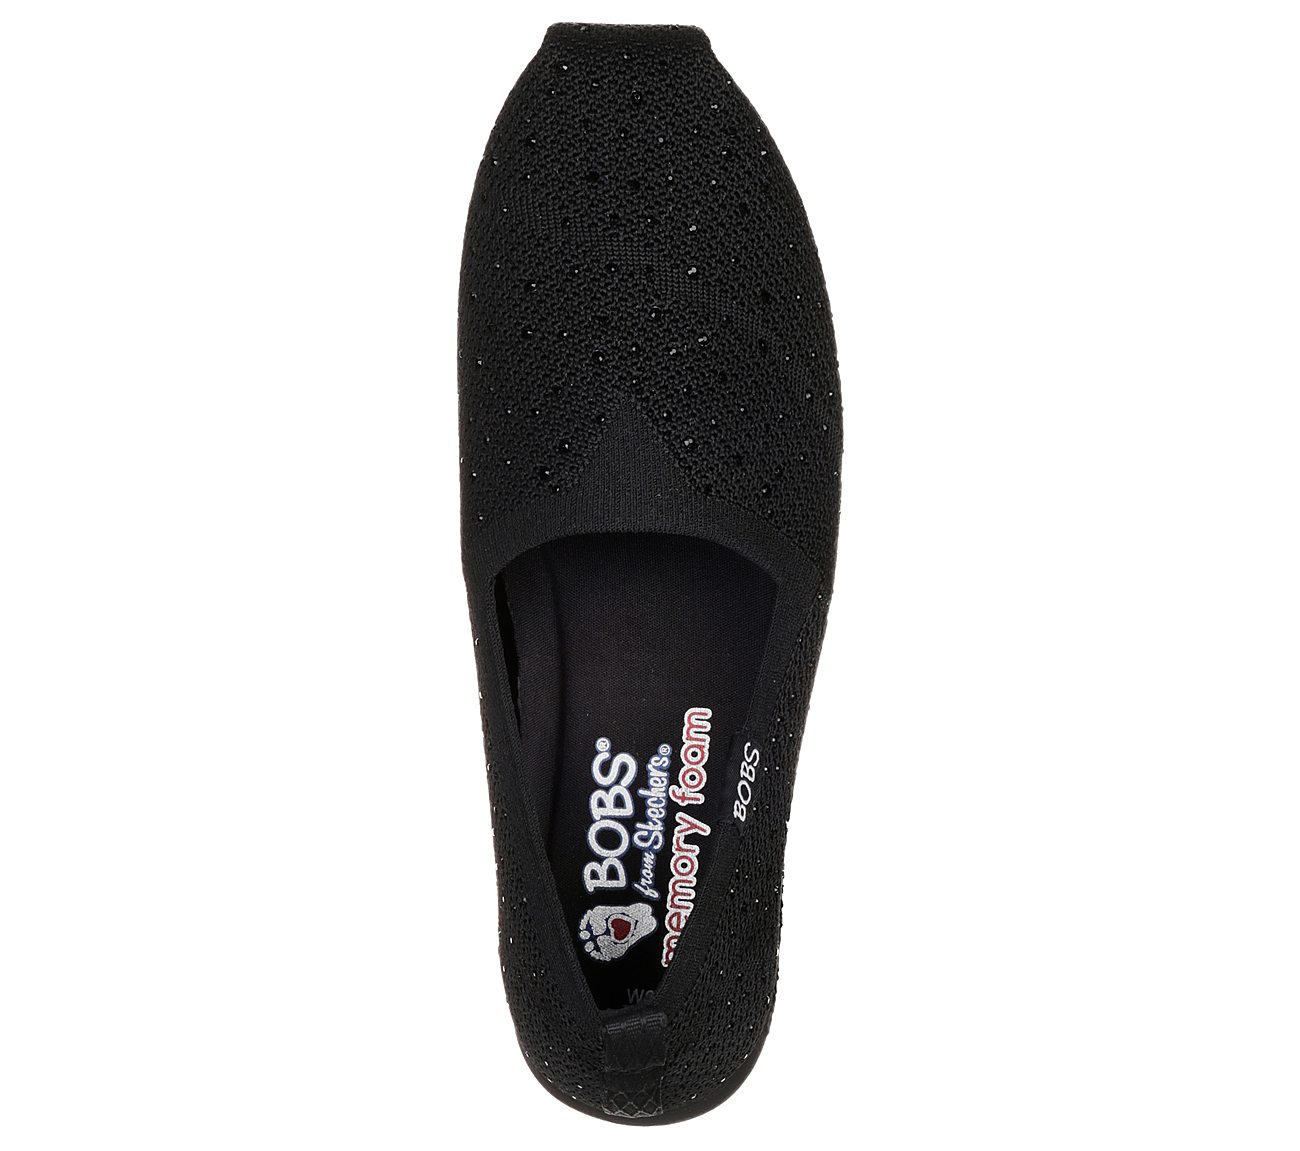 bobs by skechers sandals Sale,up to 75 